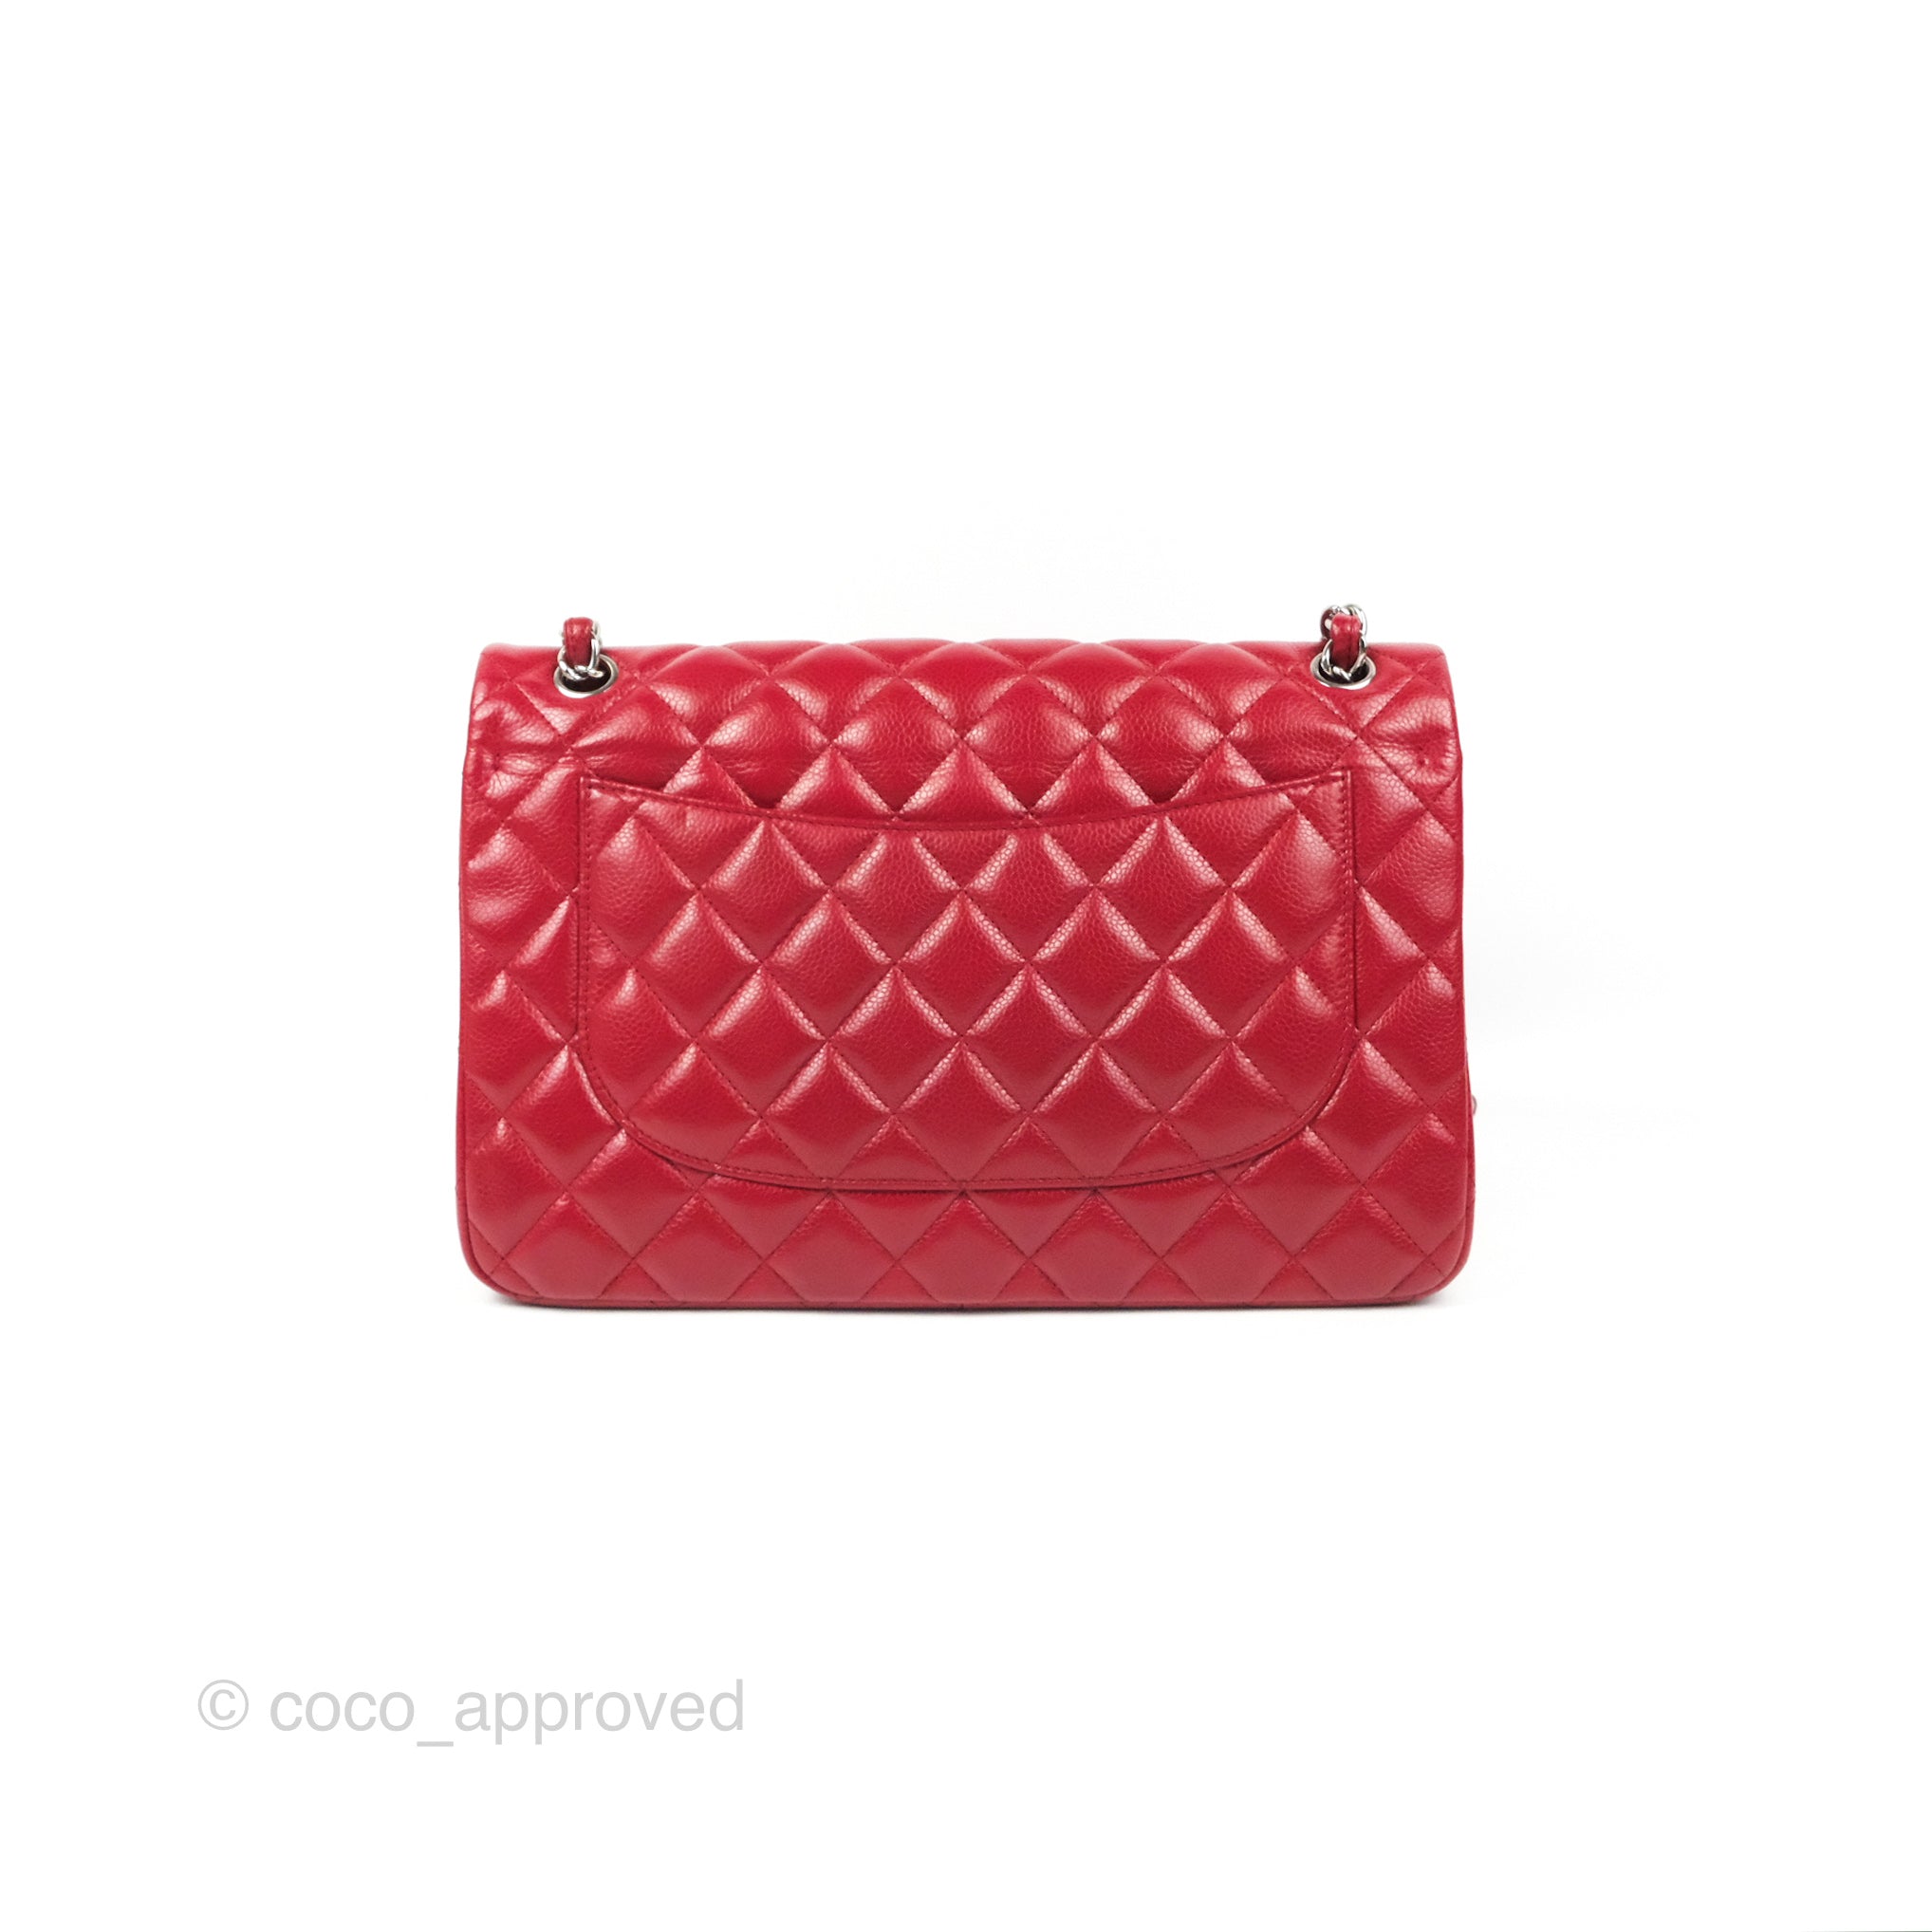 classic red chanel bag